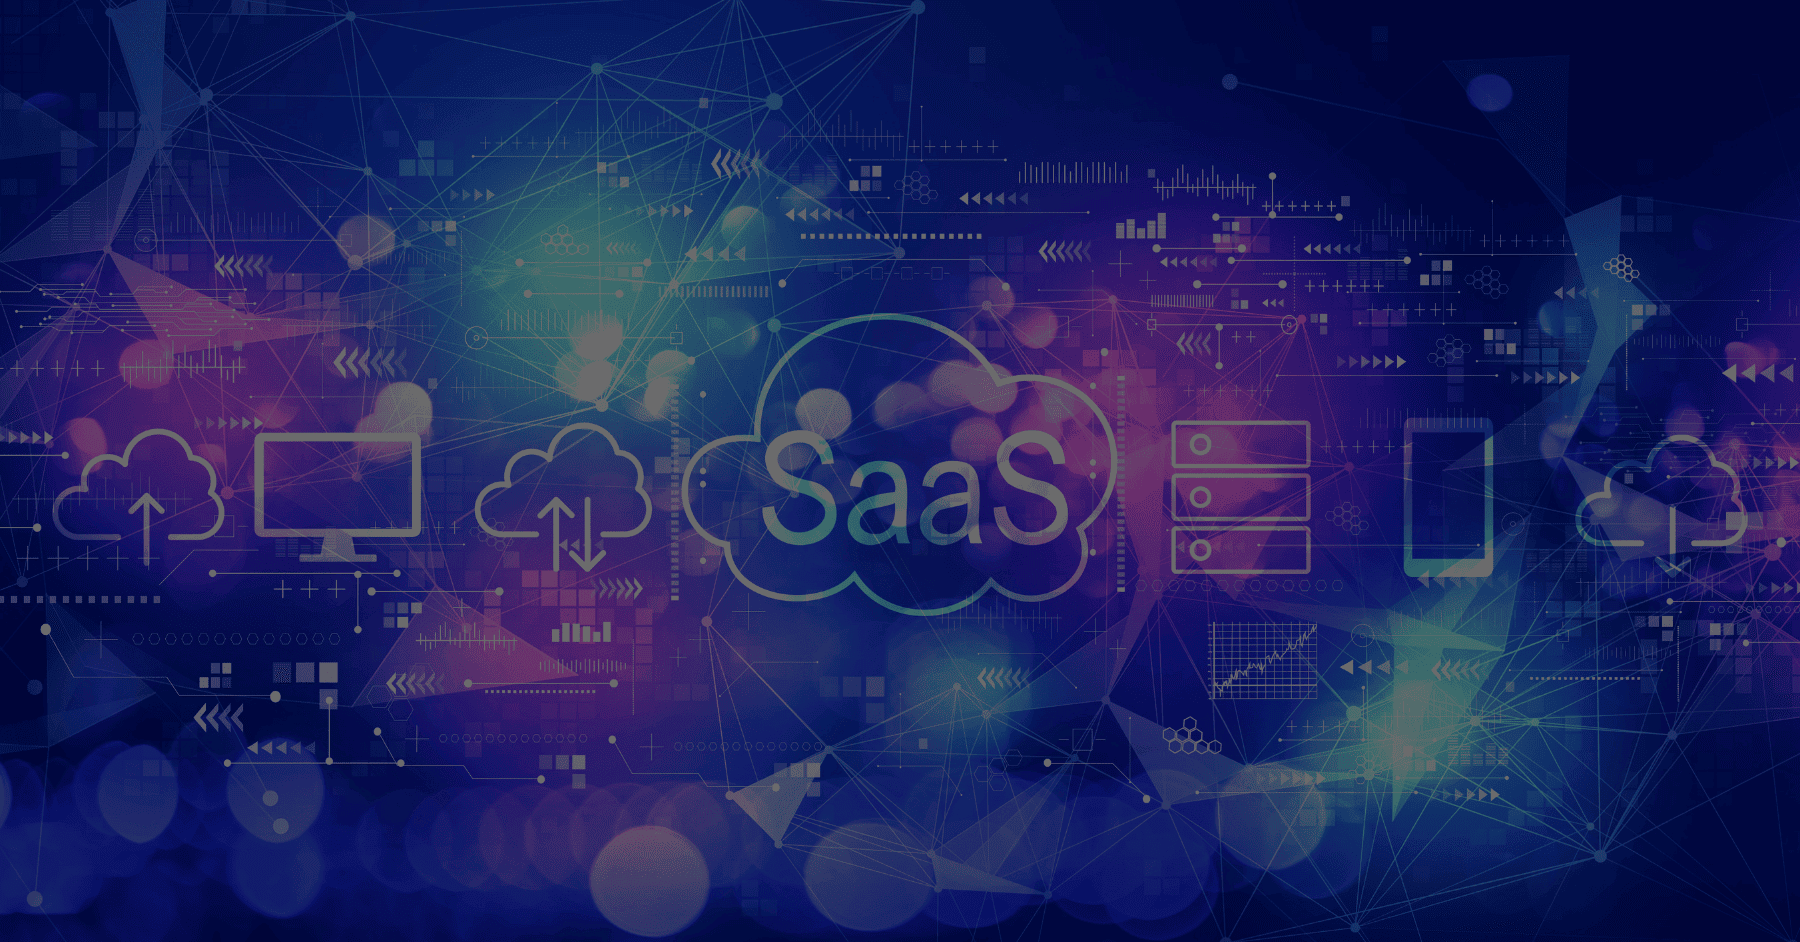 Top 10 selection criteria for SaaS